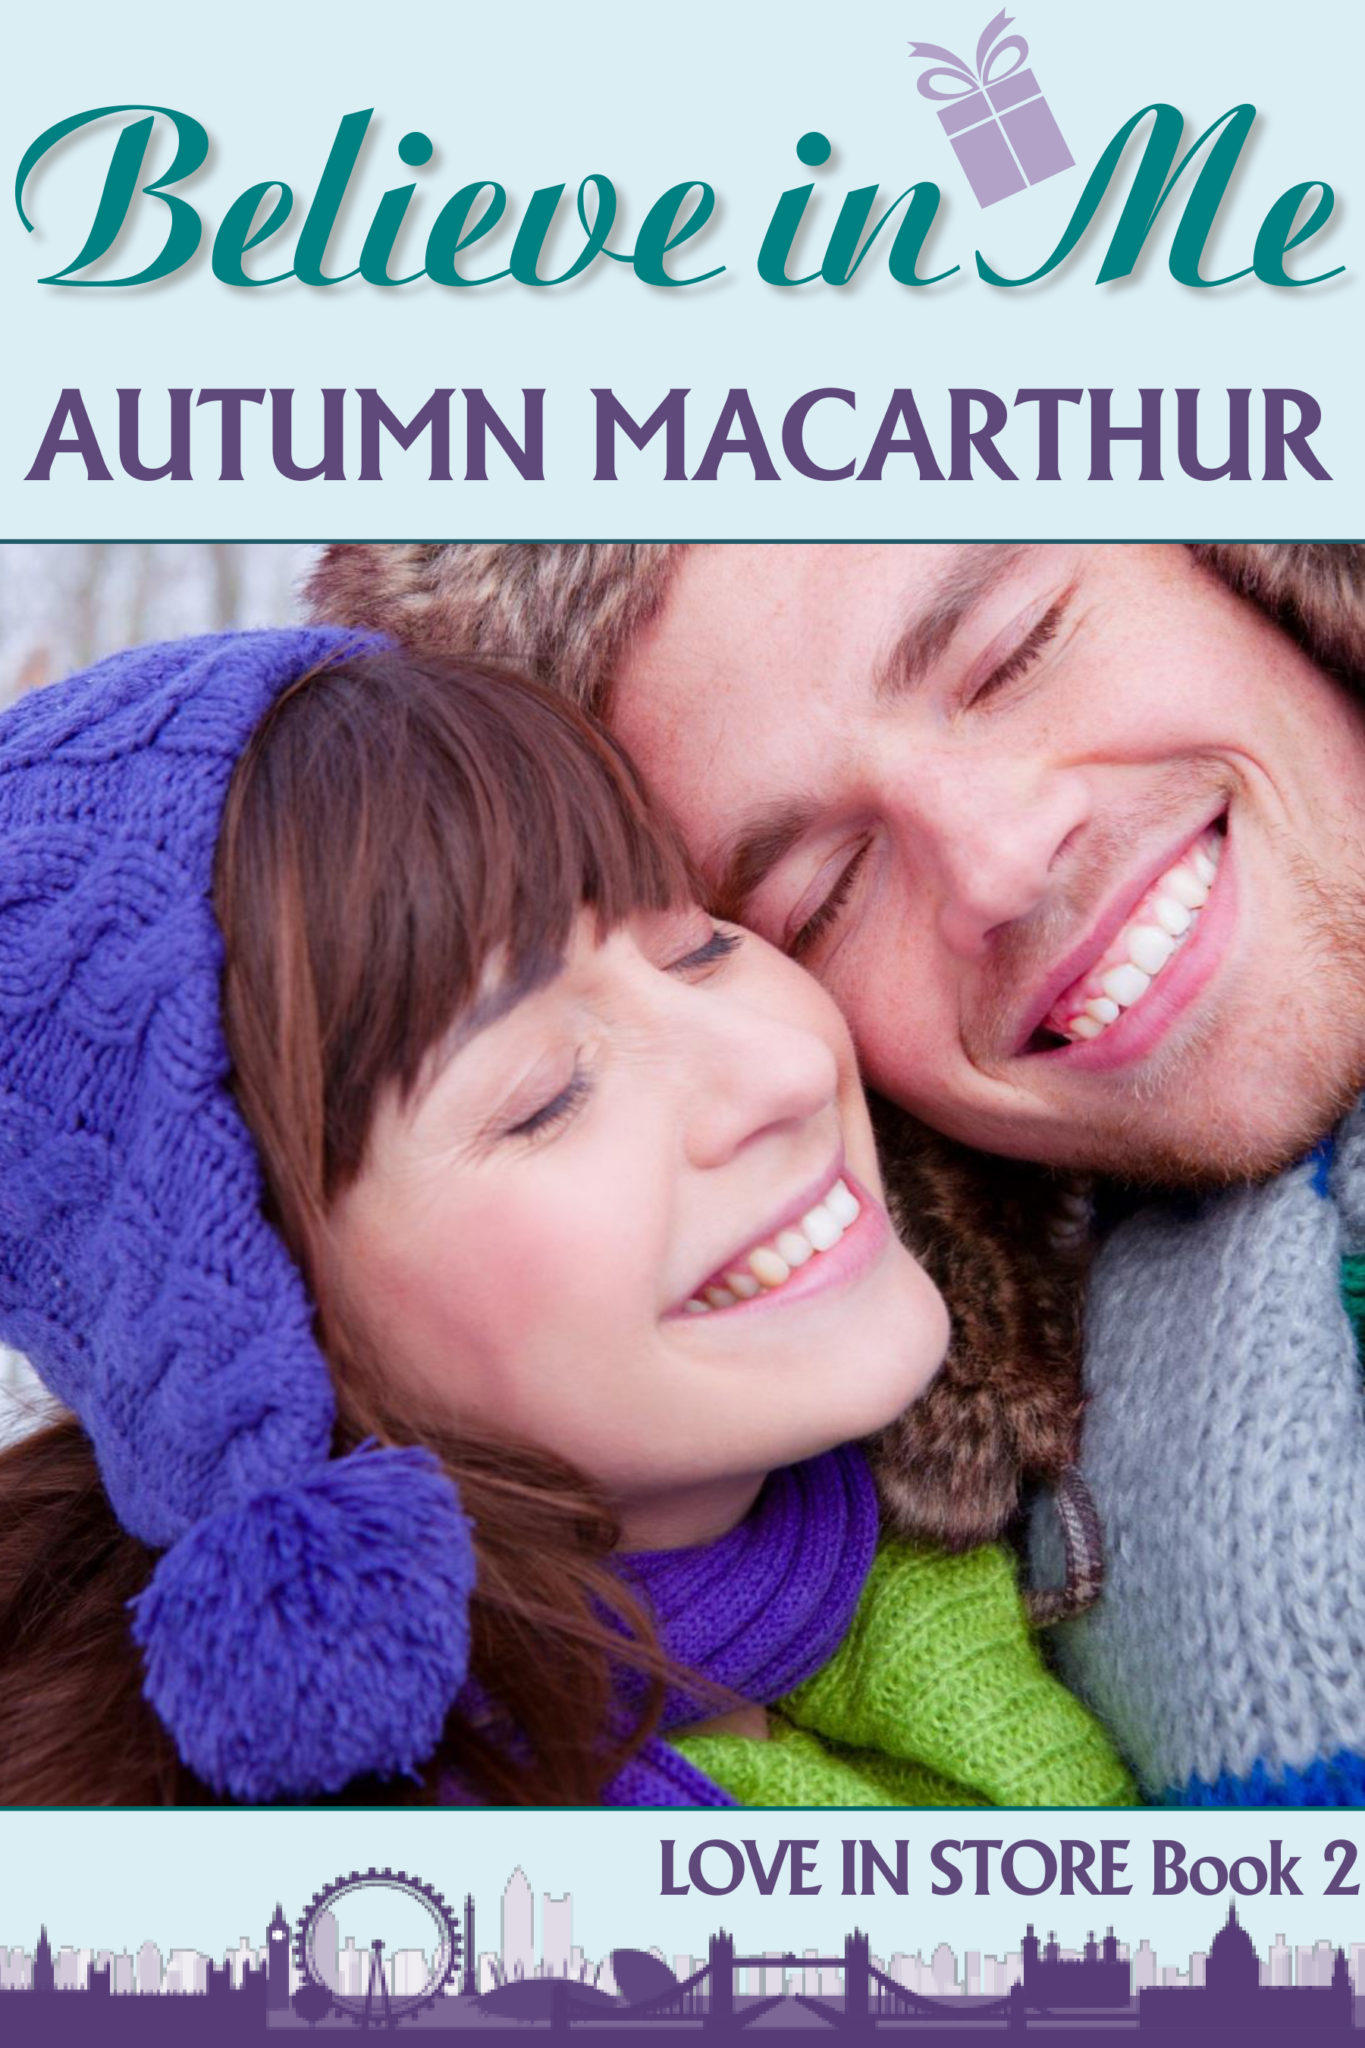 FREE: Believe in Me by Autumn Macarthur